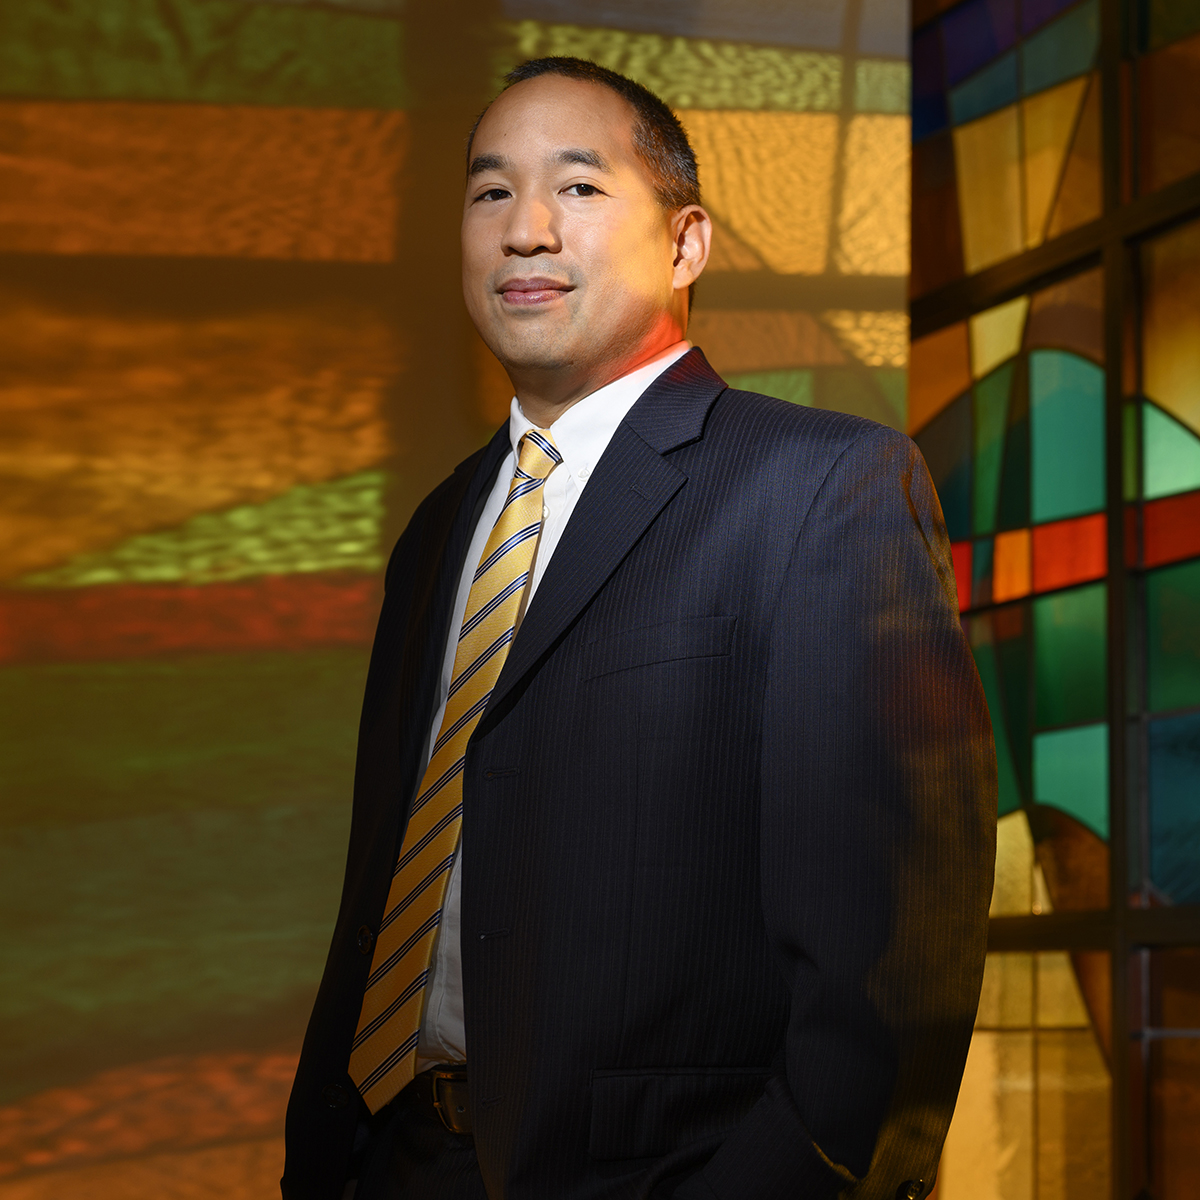 Photo of a smiling man in a suit, standing in front of colorful stained glass